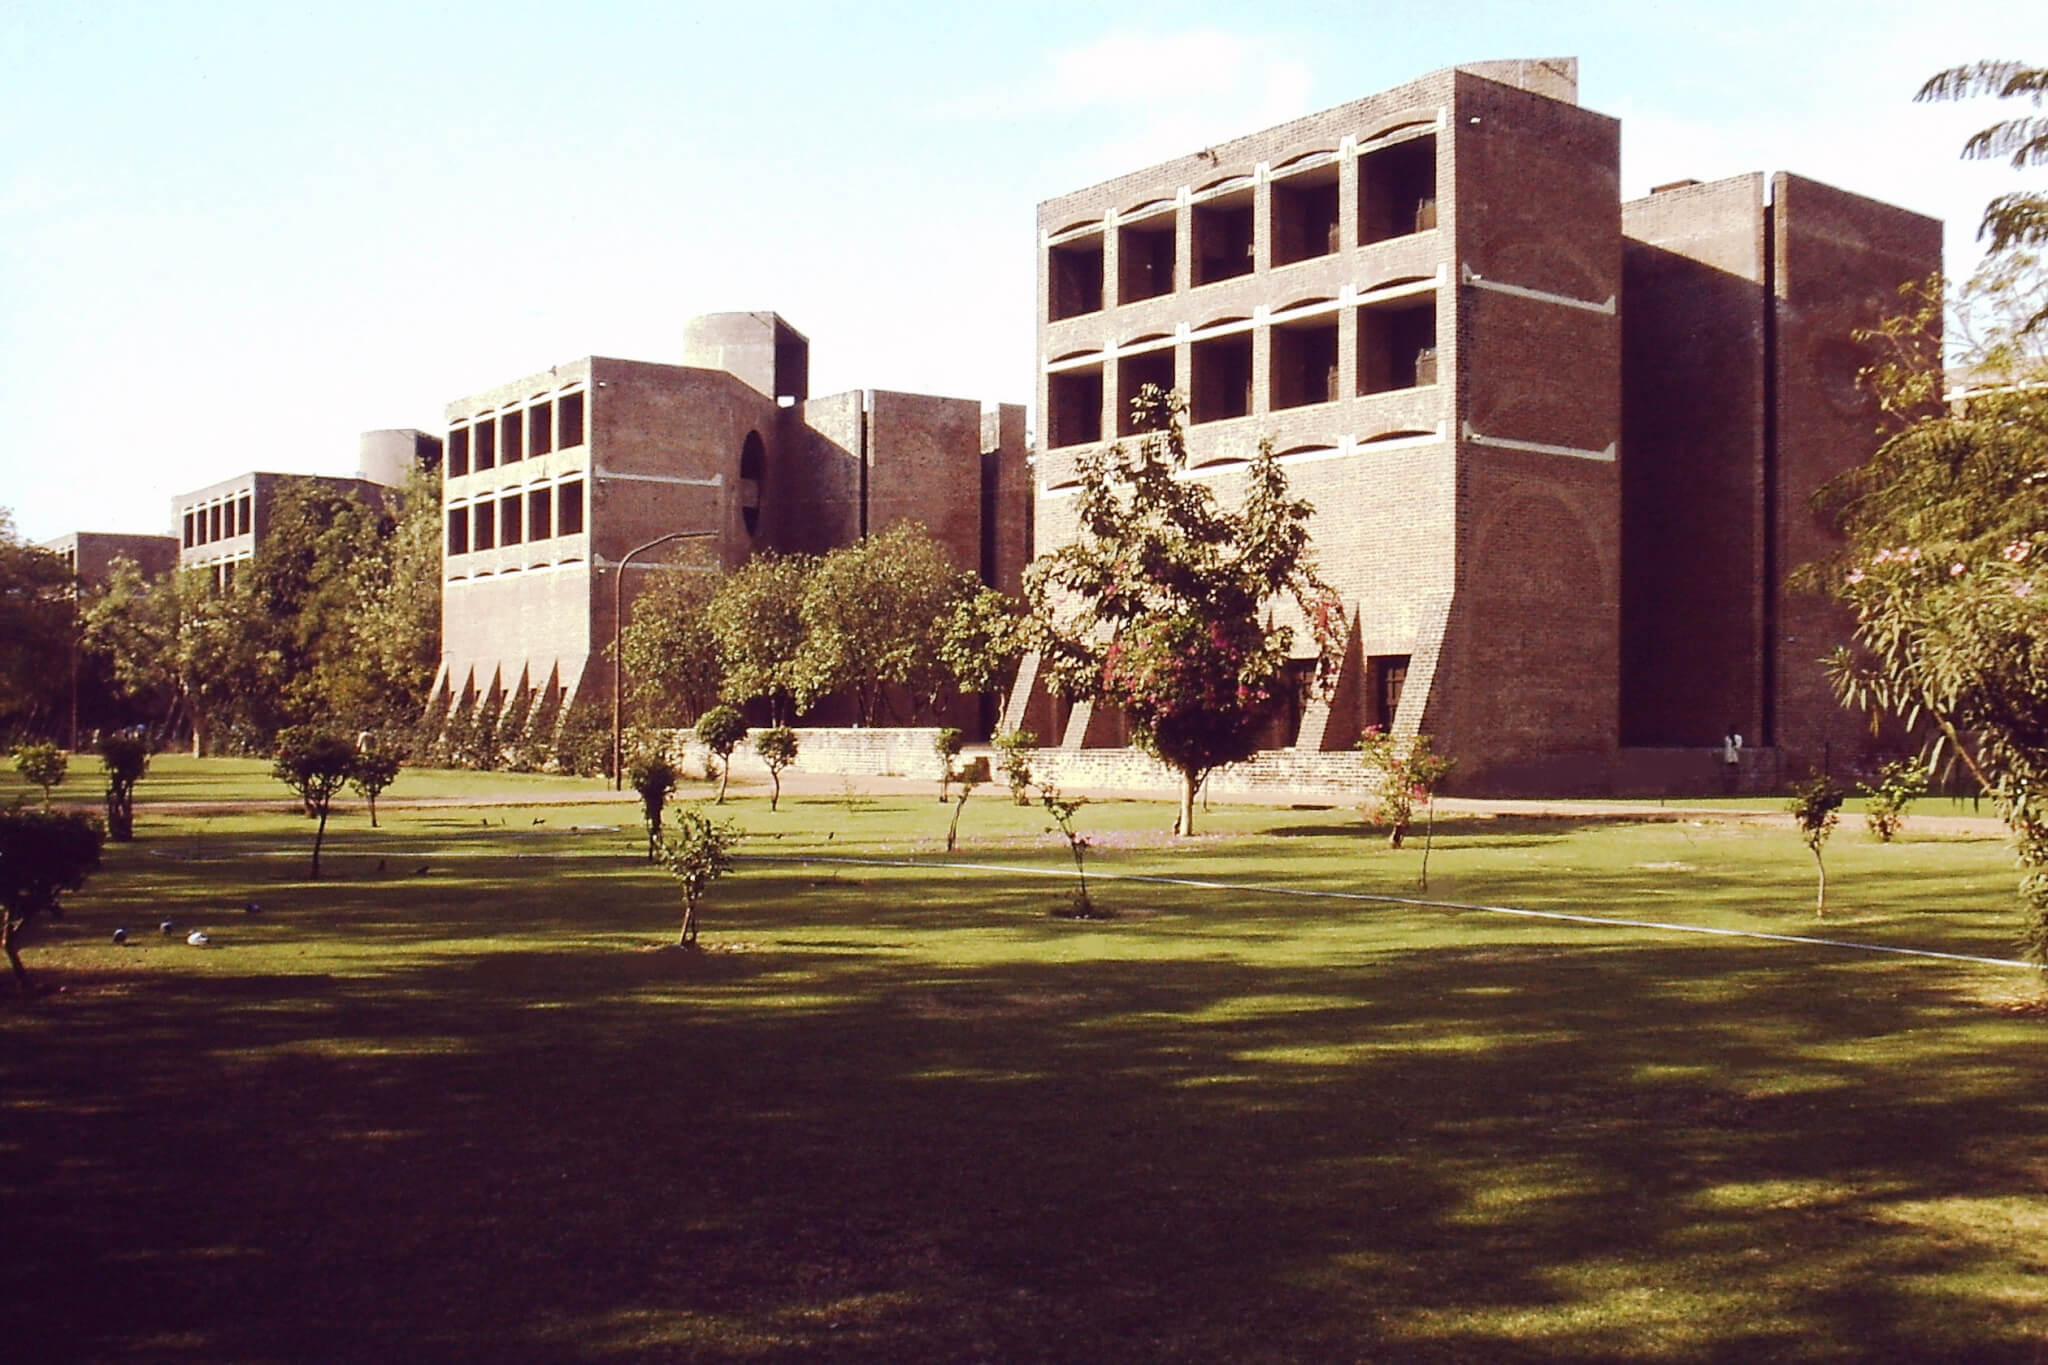 brick and concrete buildings with a lawn and trees in Ahmedabad, India